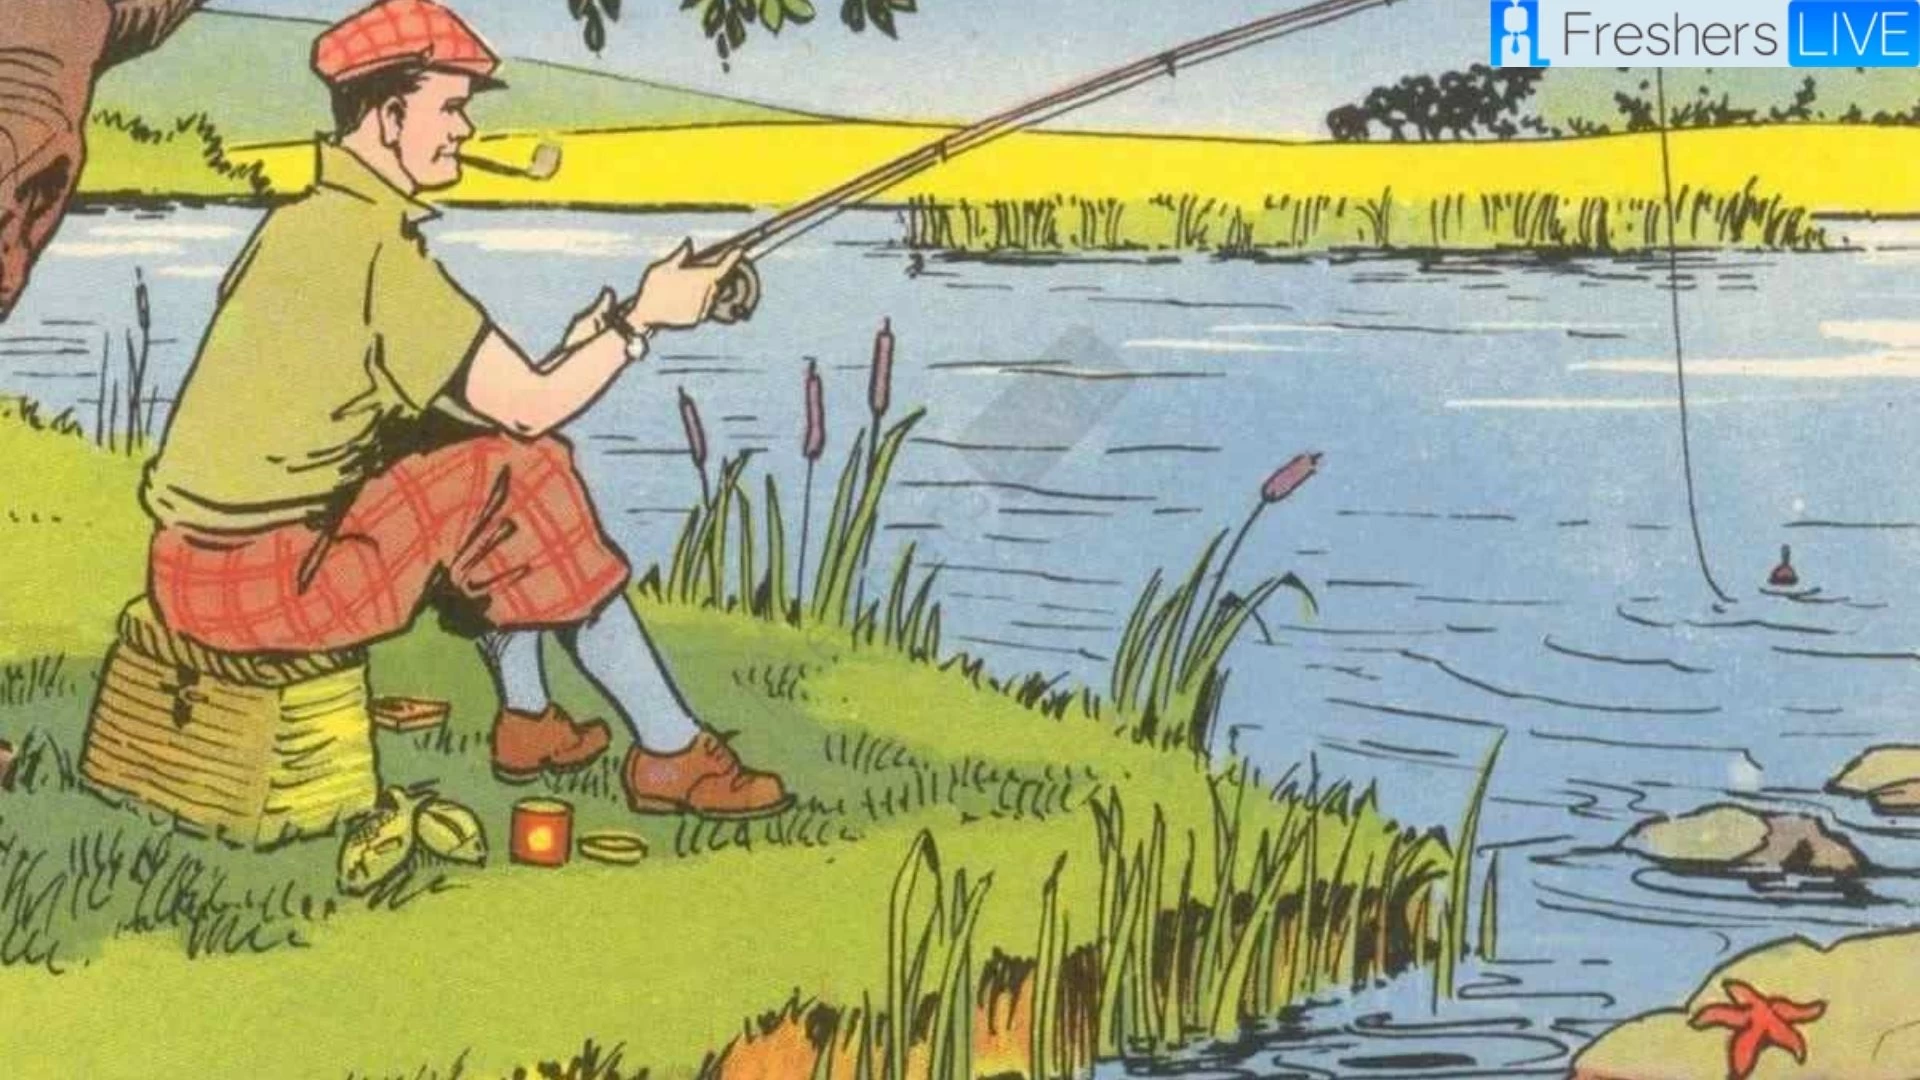 How Intelligent Are You? Tell What Is Wrong With The Fishing Picture In 8 Seconds!